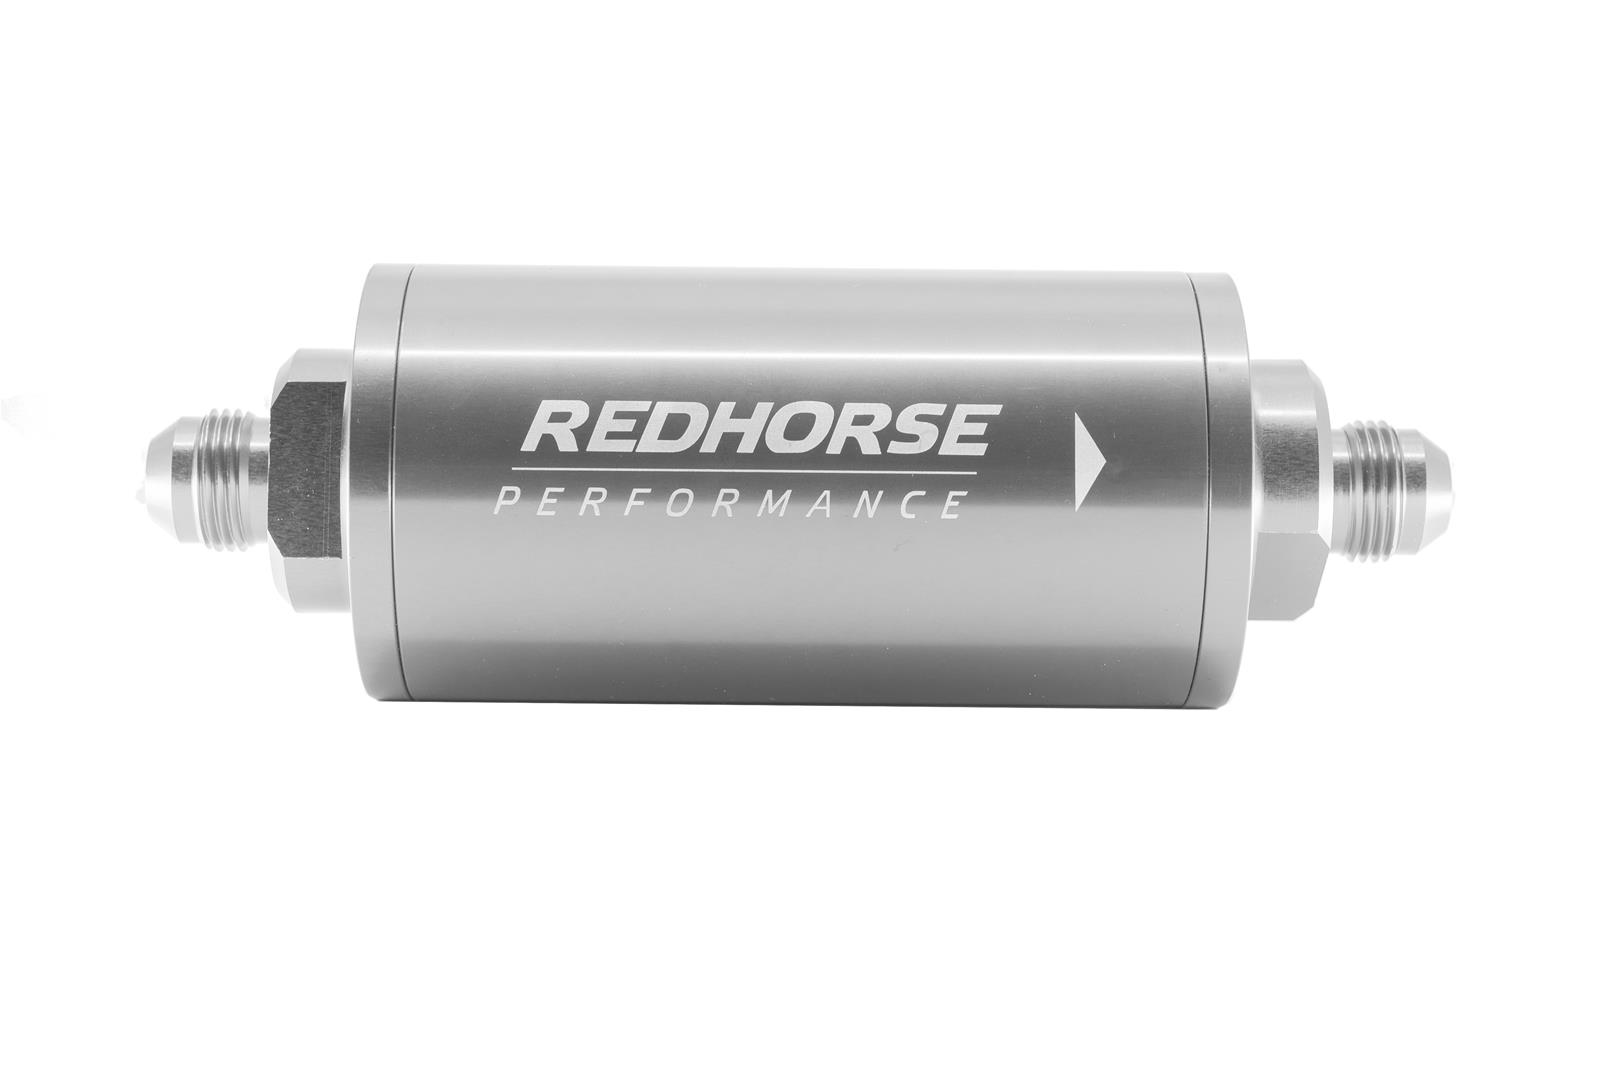 Redhorse Performance 4651-06-5-100 6in Cylindrical In-Line Race Fuel Filter w/ 100 Micron S.S. element - 06 AN